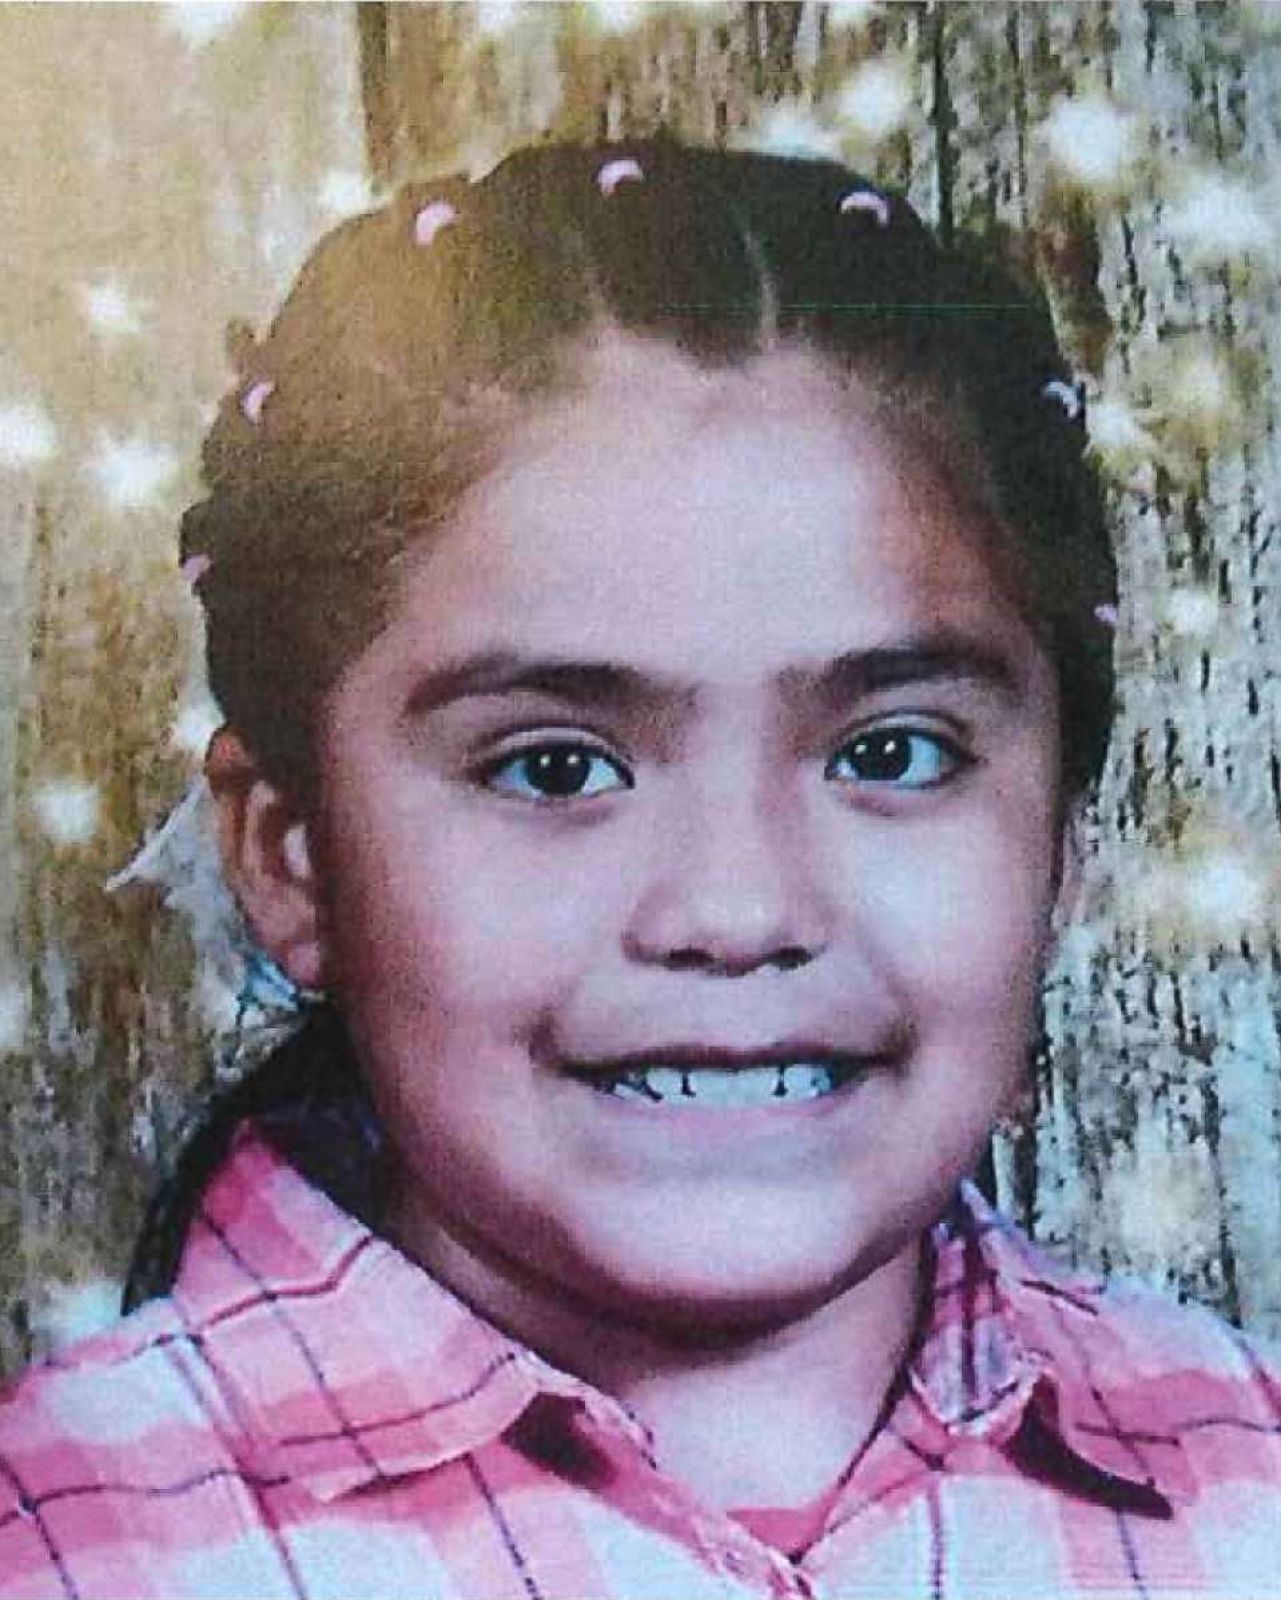 9 Year Old Girl Killed By Stray Gunfire While In Her Bedroom Officials